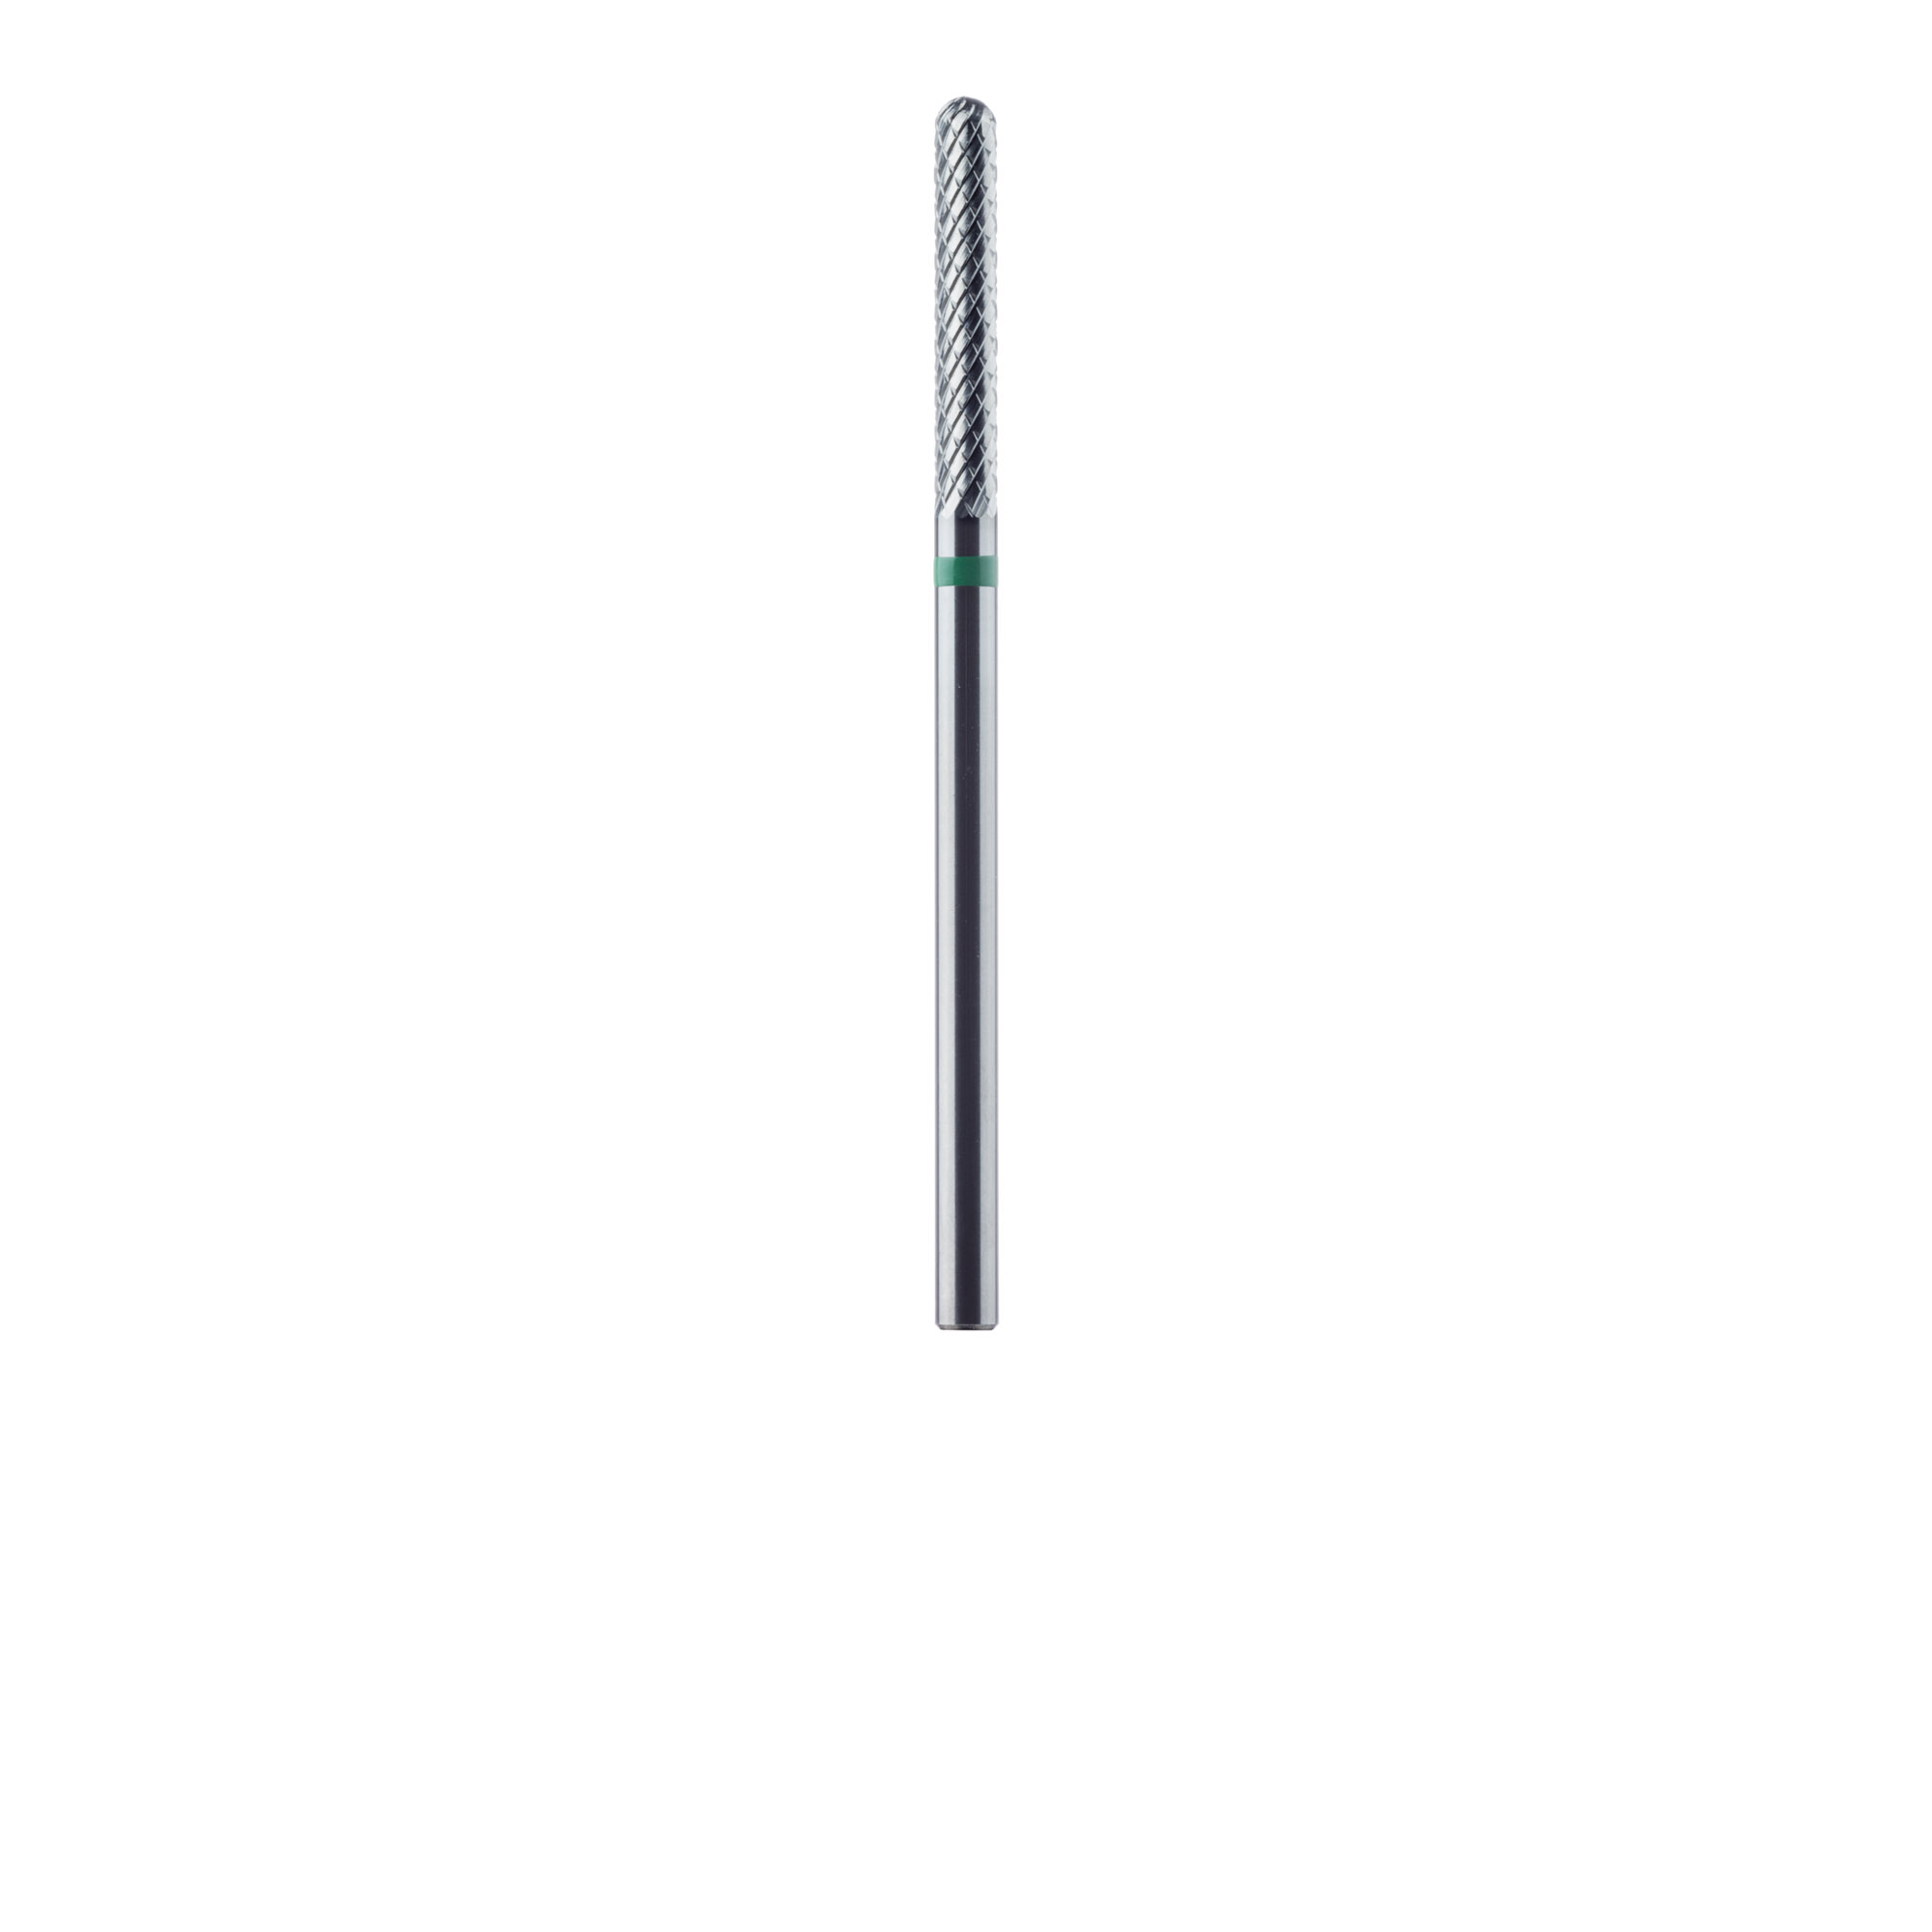 HM486HT-023-HP Laboratory Carbide Bur, Coarse, Special toothing for Titanium, 2.3mm, HP